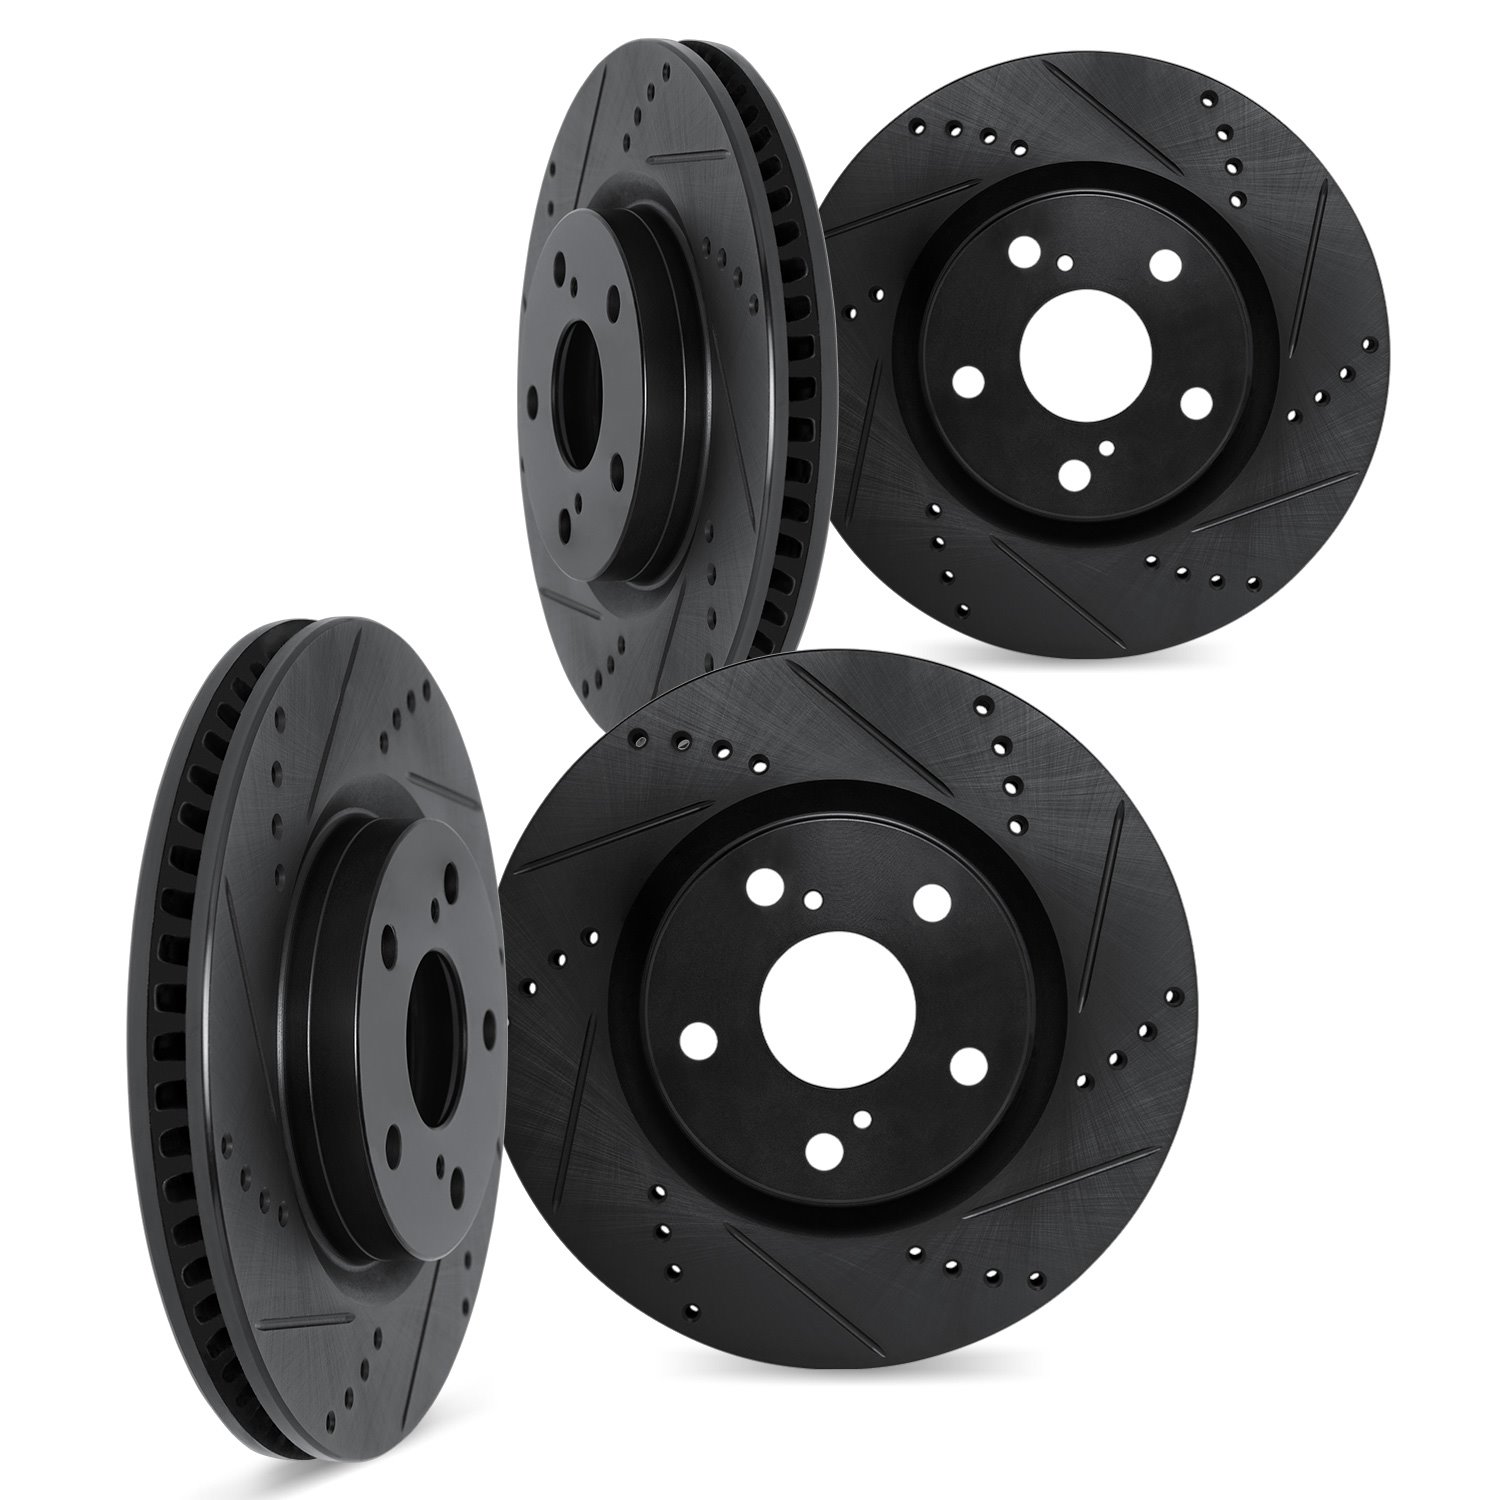 8004-76130 Drilled/Slotted Brake Rotors [Black], 1991-1996 Lexus/Toyota/Scion, Position: Front and Rear